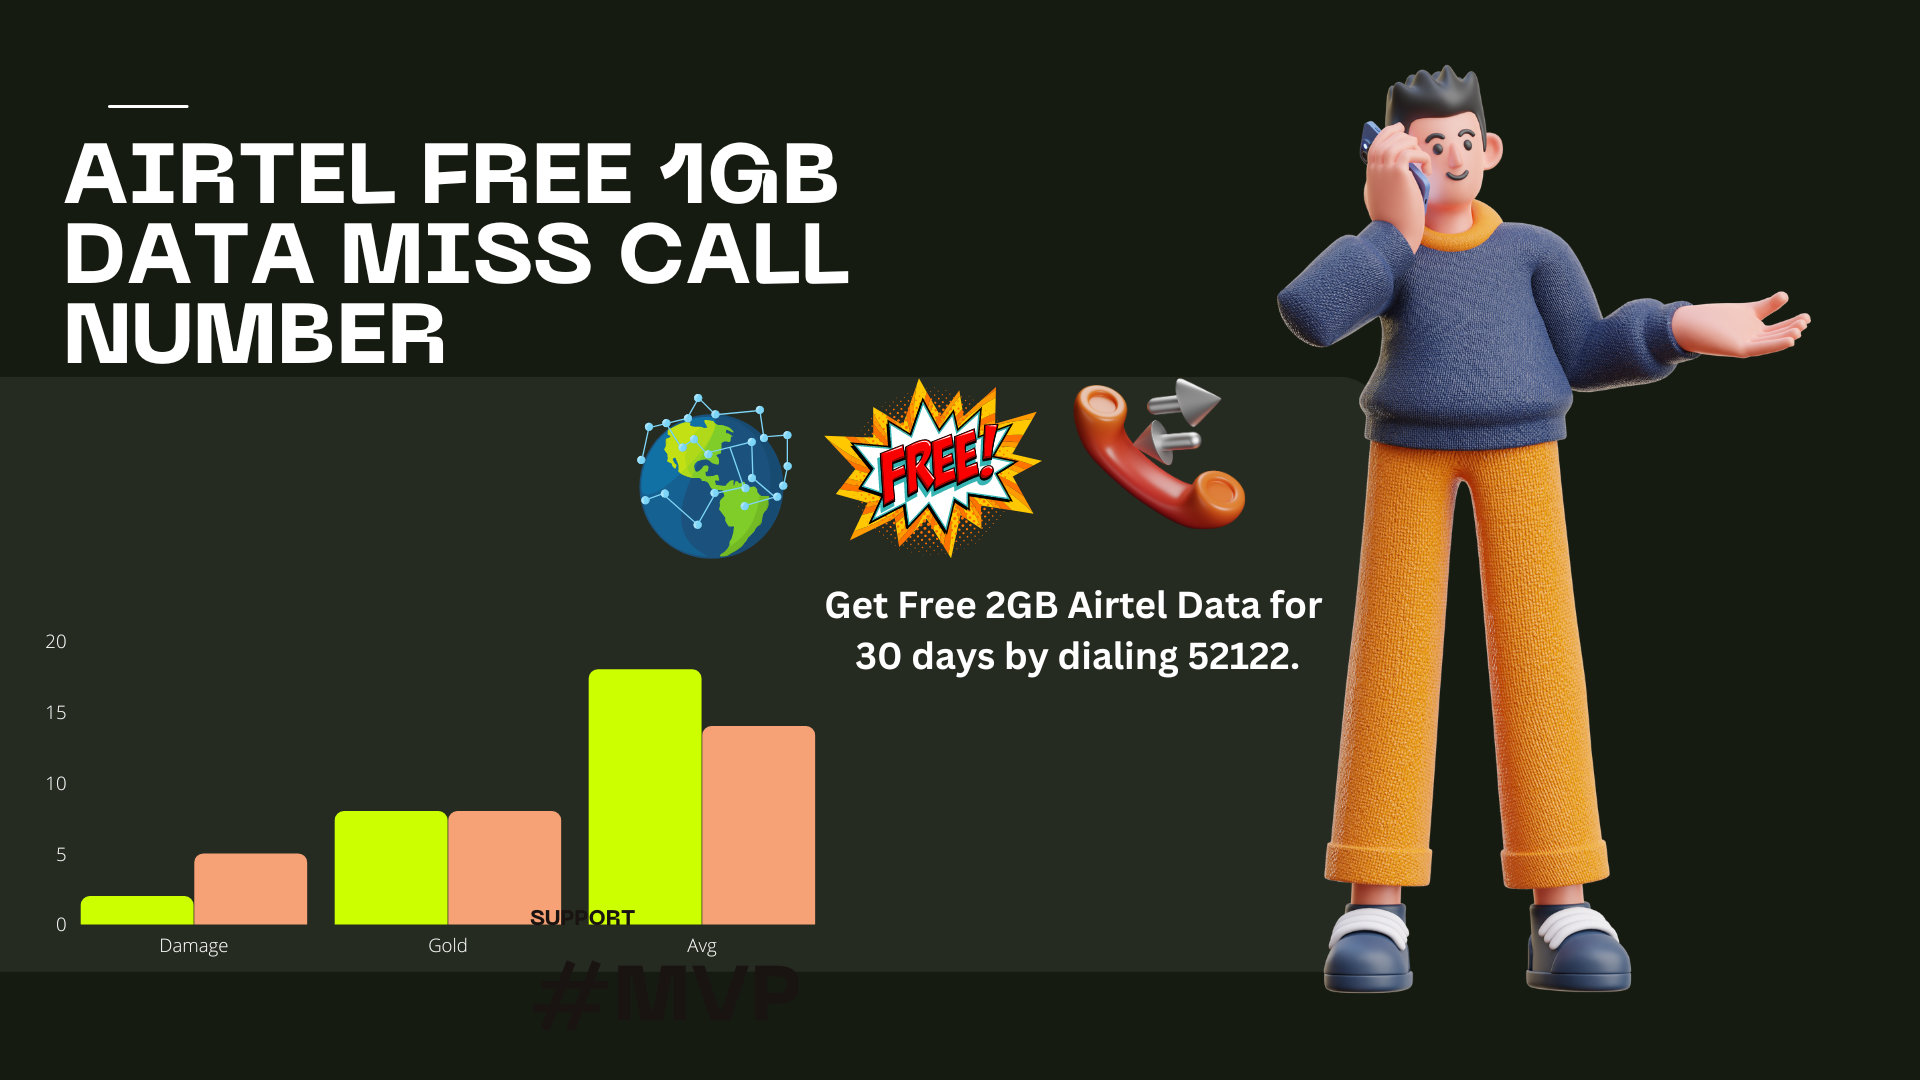 Airtel Free 1GB Data Miss Call Number 100% Working